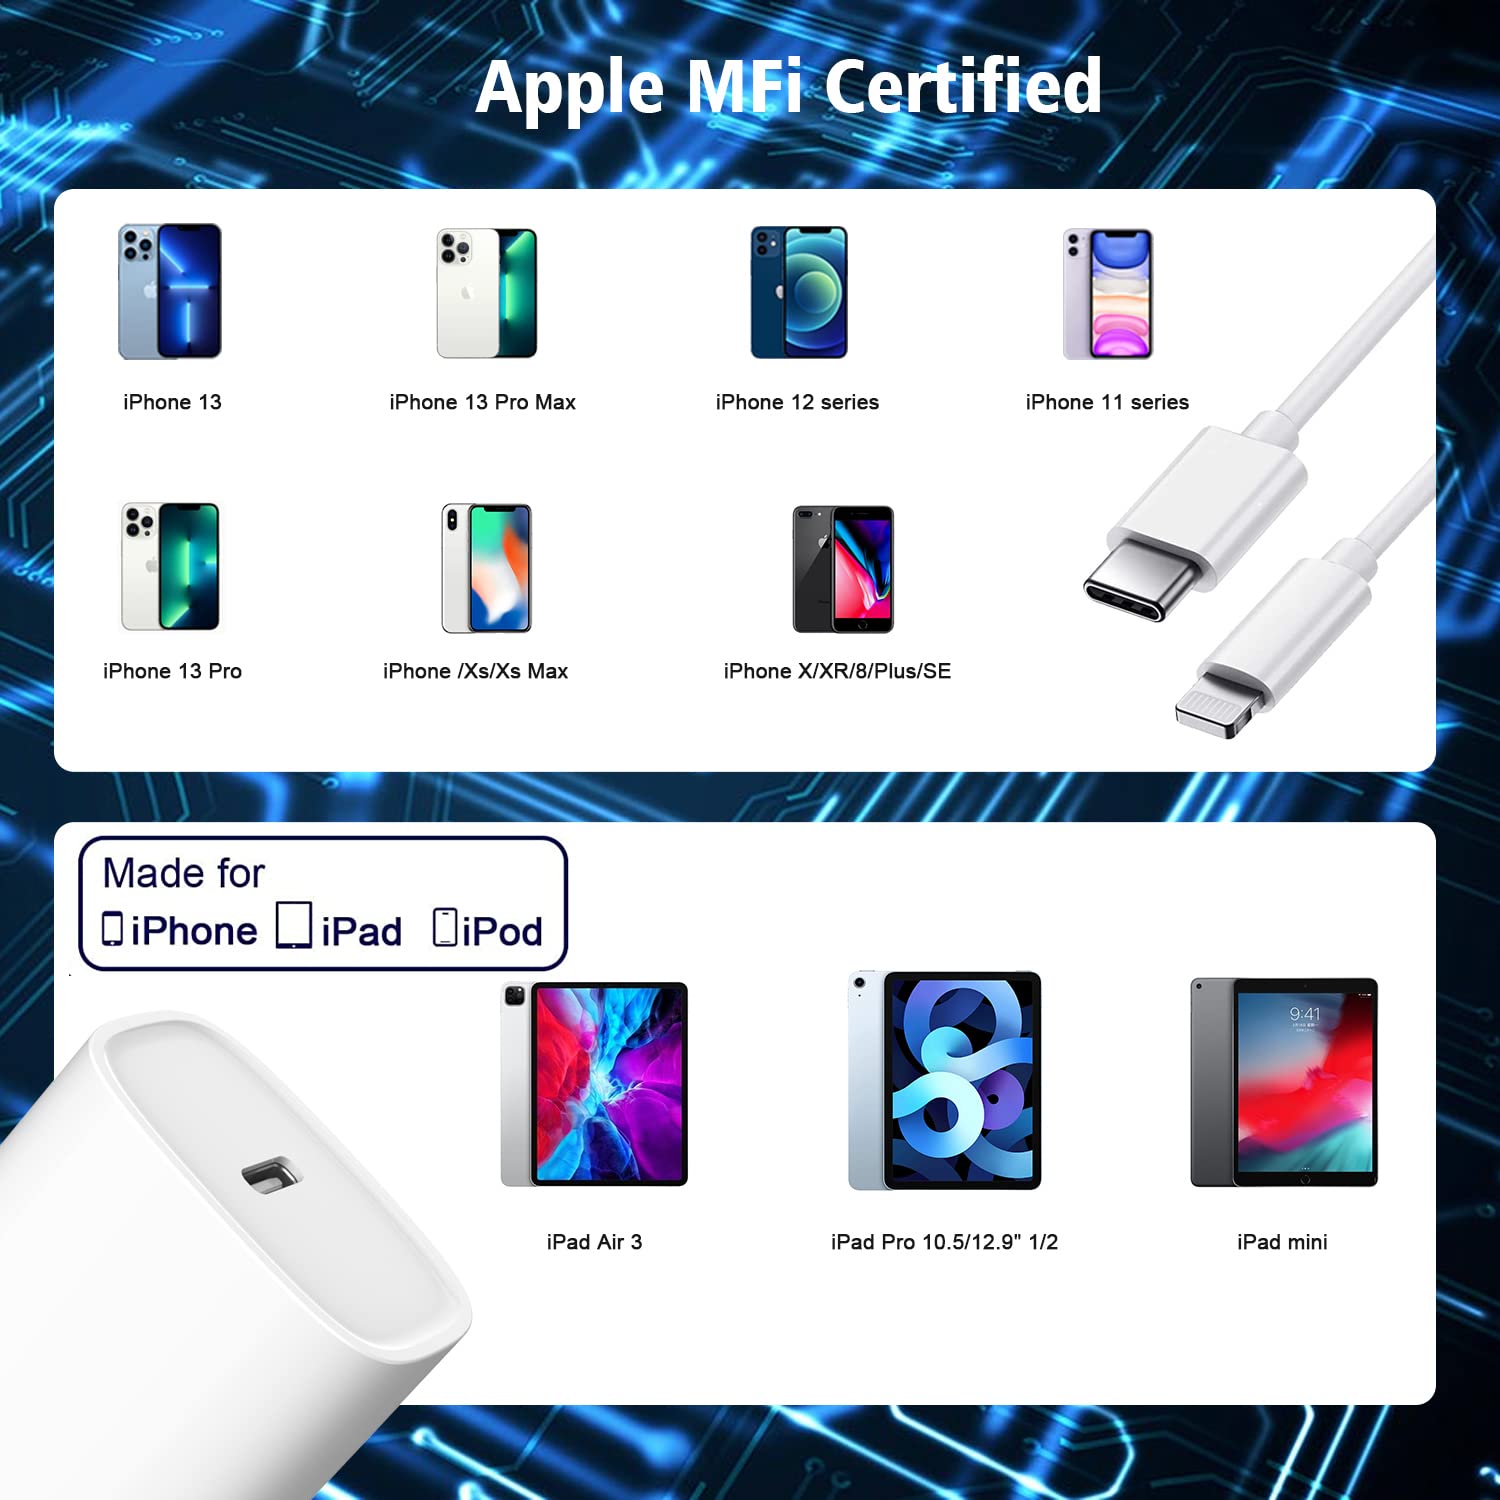 10 FT iPhone Charger Fast Charging,【Apple MFi Certified】Long iPhone 13 Charger, USB C to Lightning Cable +20W PD Type C Wall Charger Block Rapid Transfer Cord for iPhone 13/12/Pro/Max/SE 2022/11/ XR/8